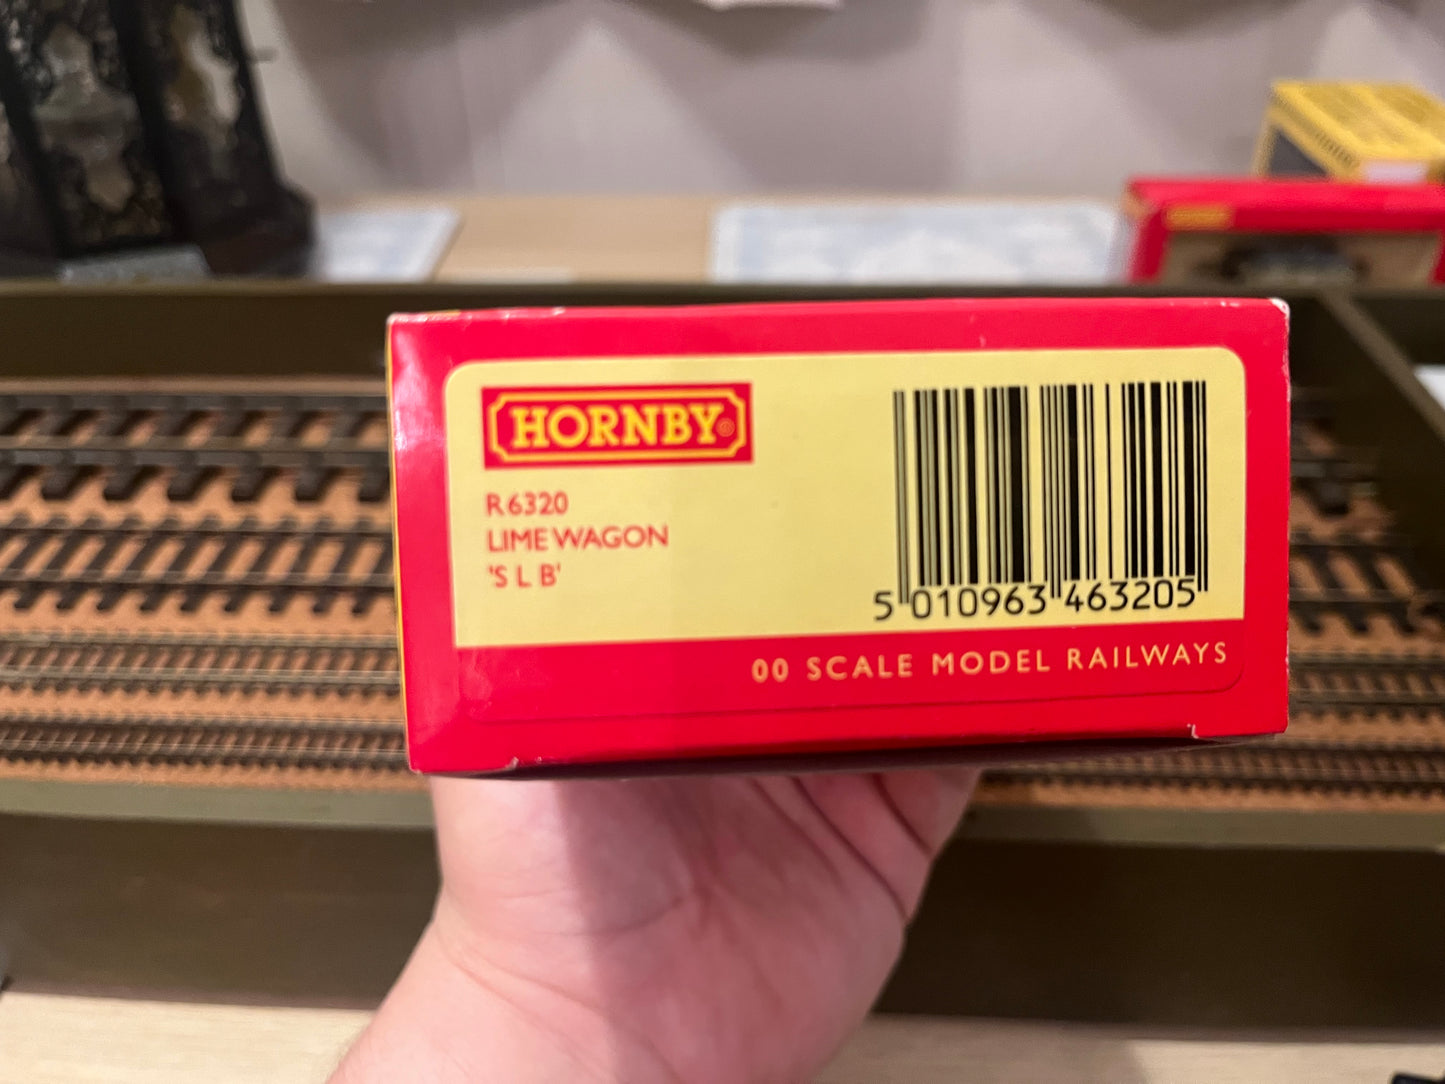 Hornby (OO) S L B livery, Lime wagon No.527.